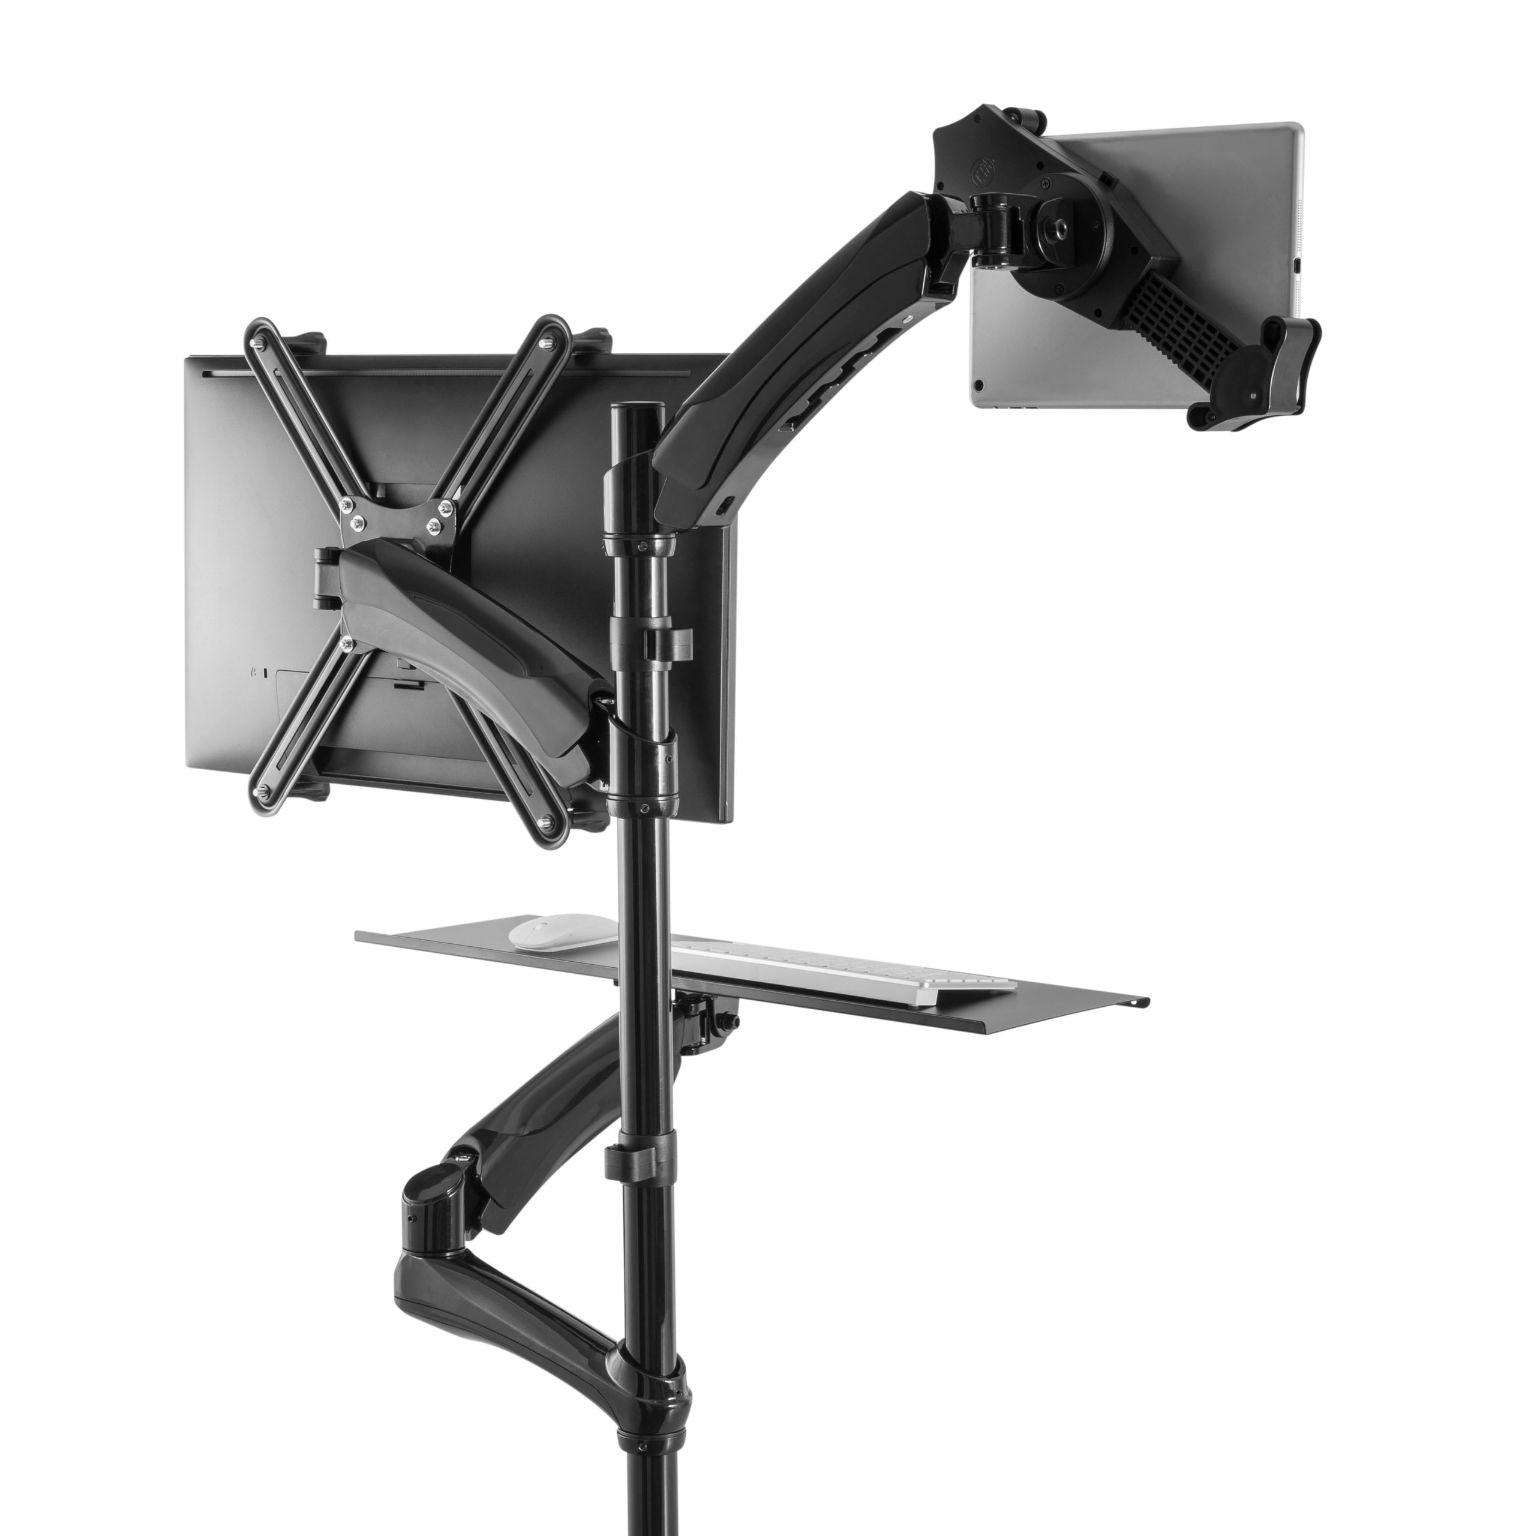 2-in-1 Adjustable Monitor and Tablet Mount Stand with Keyboard Tray